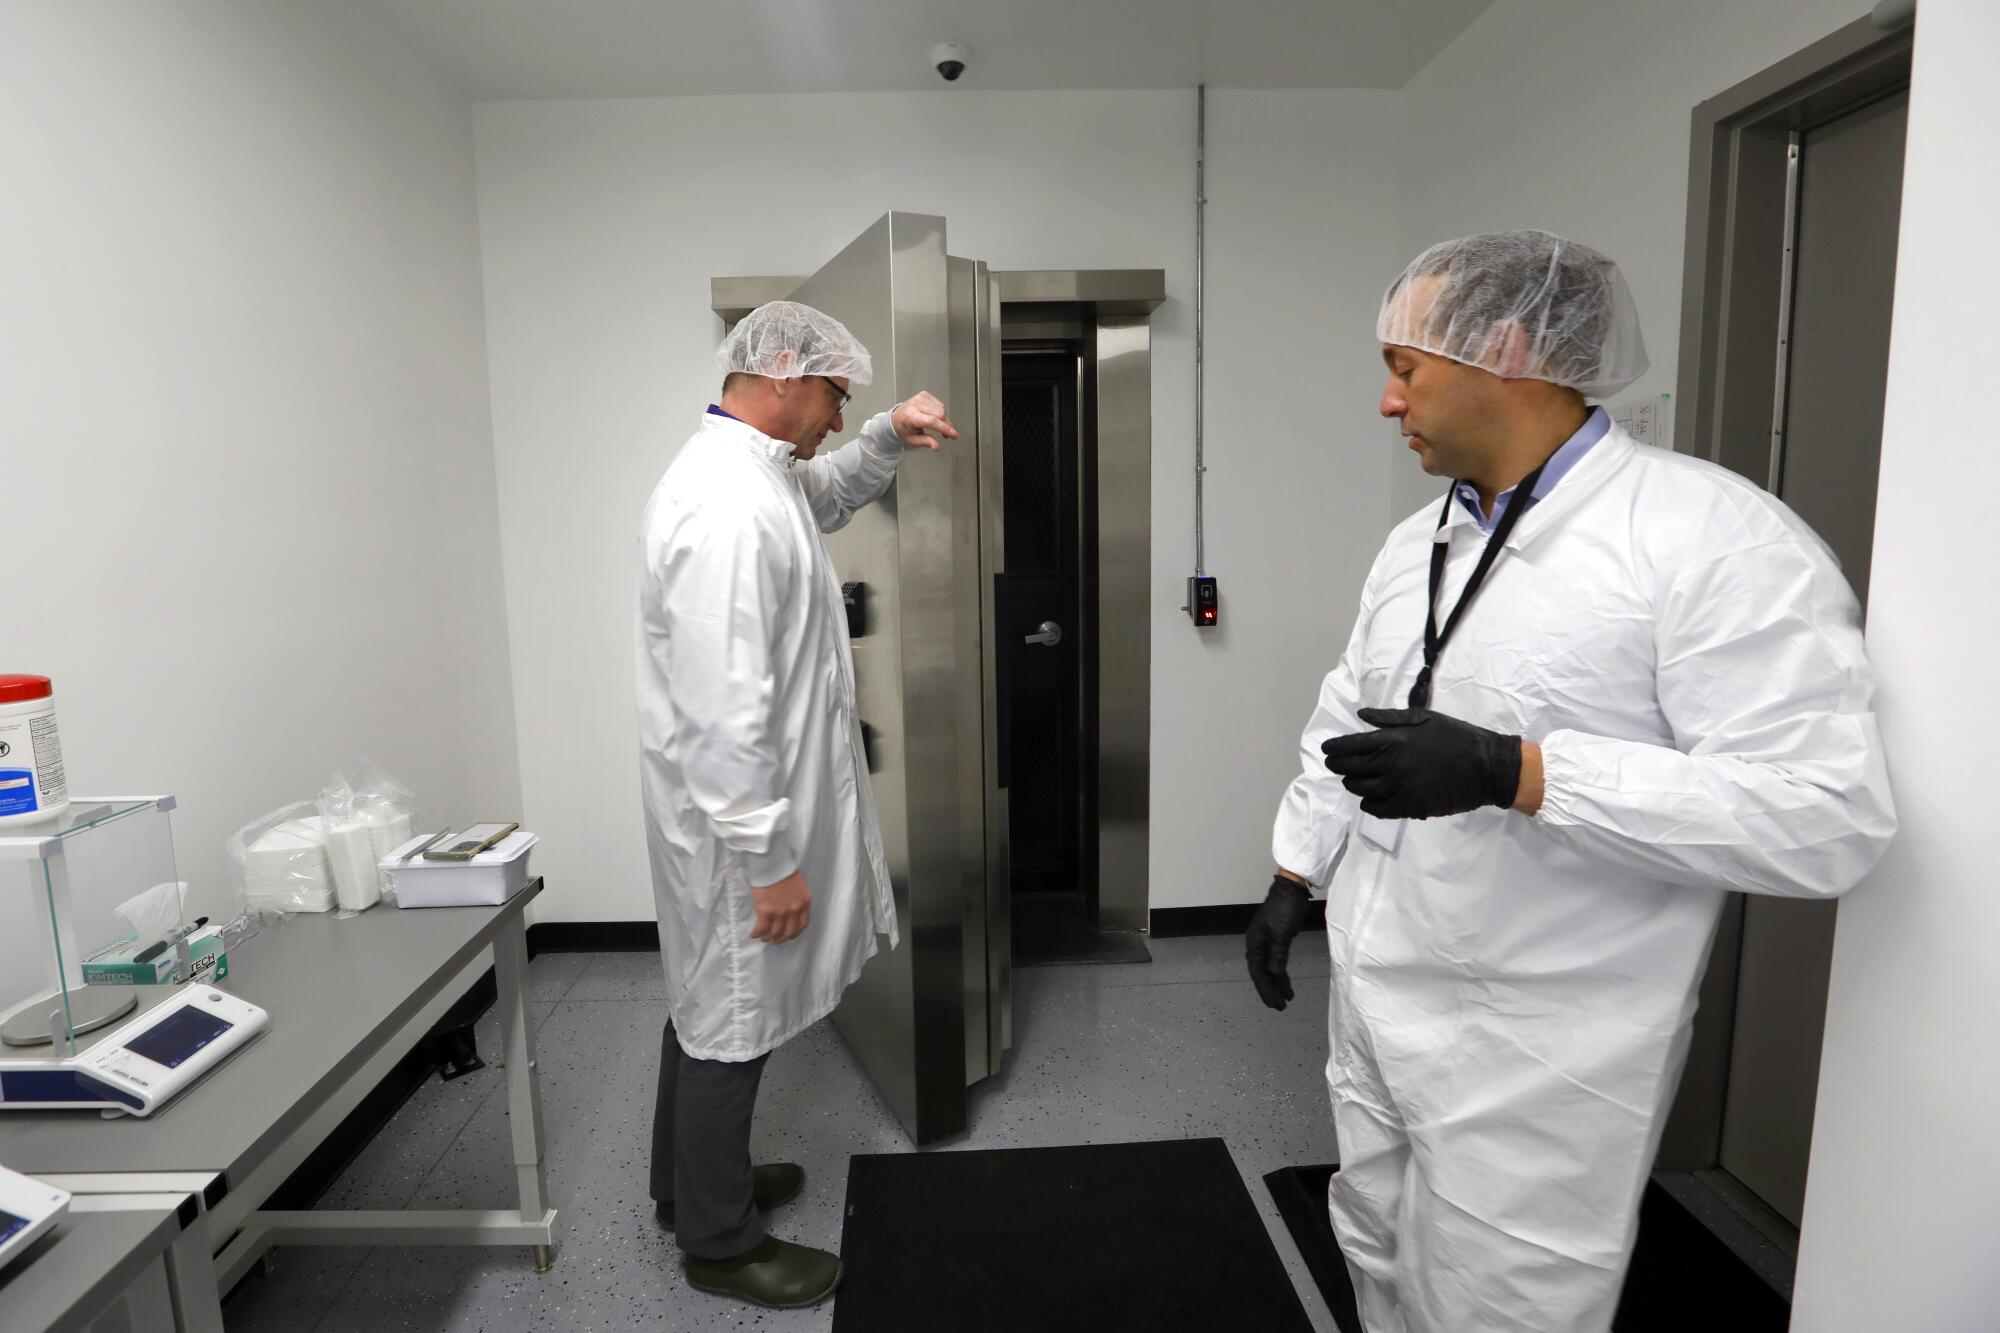 Biomedical Research Center features a $45,000 bank vault approved by the Drug Enforcement Administration.